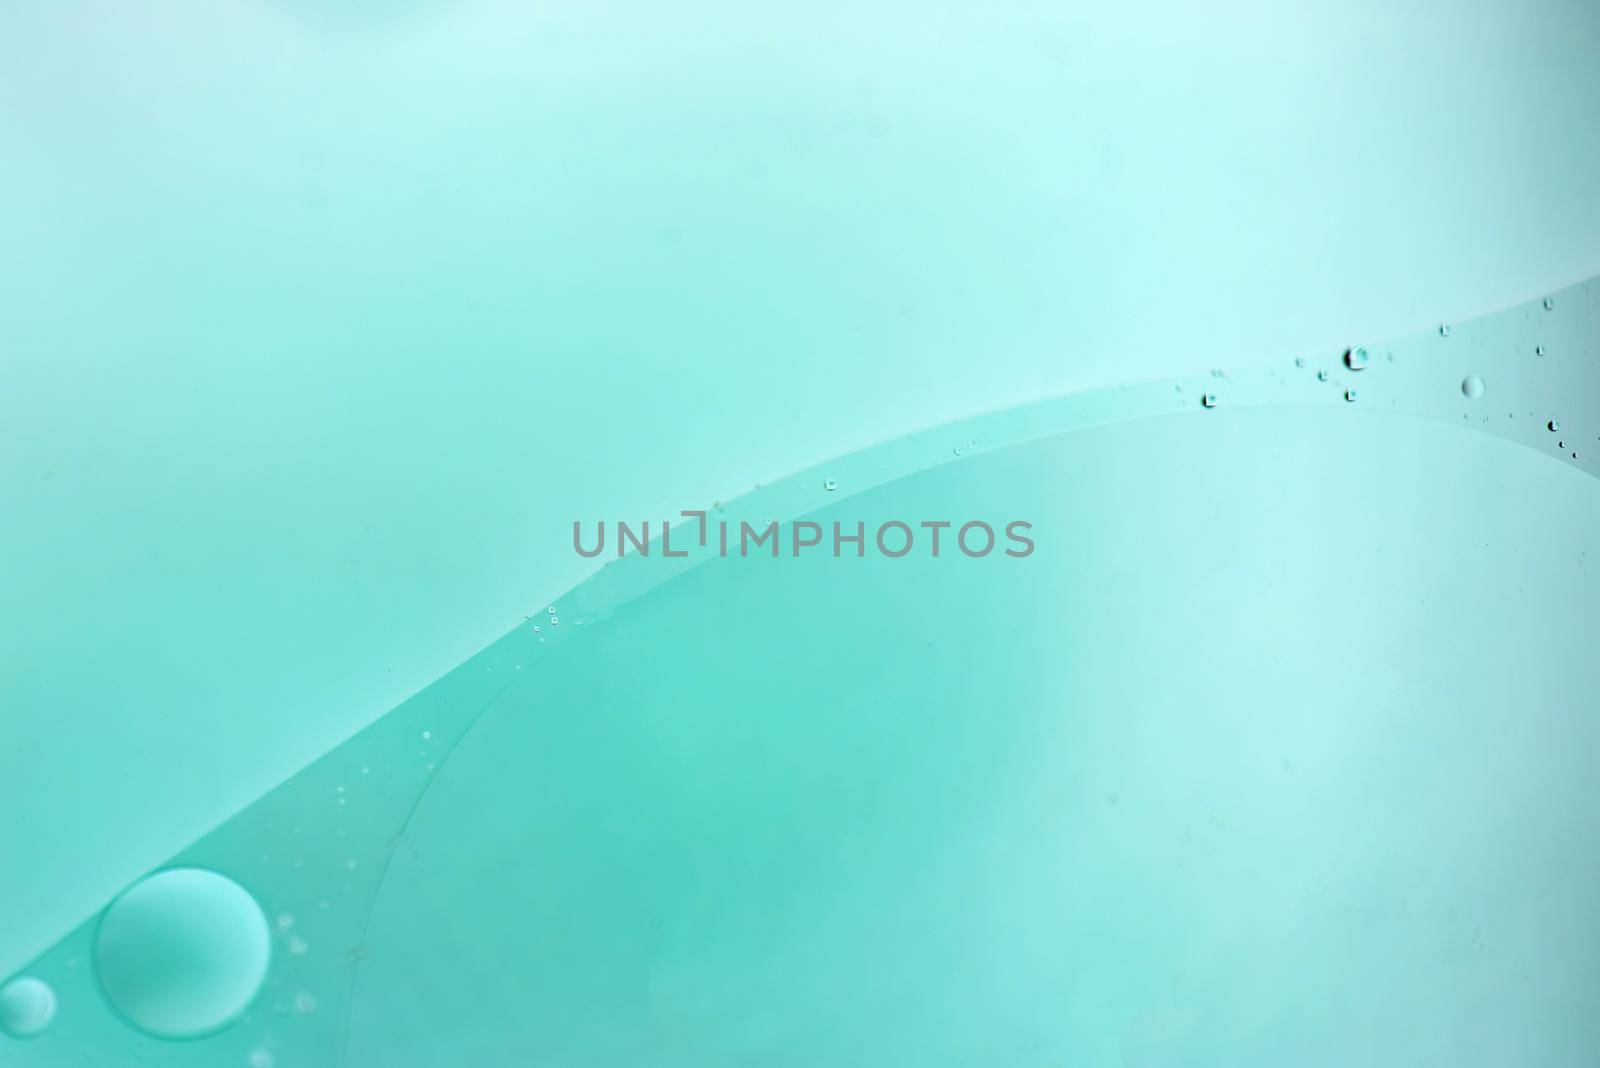 Oil drops in water. Defocused abstract psychedelic pattern image light blue colored. DOF.